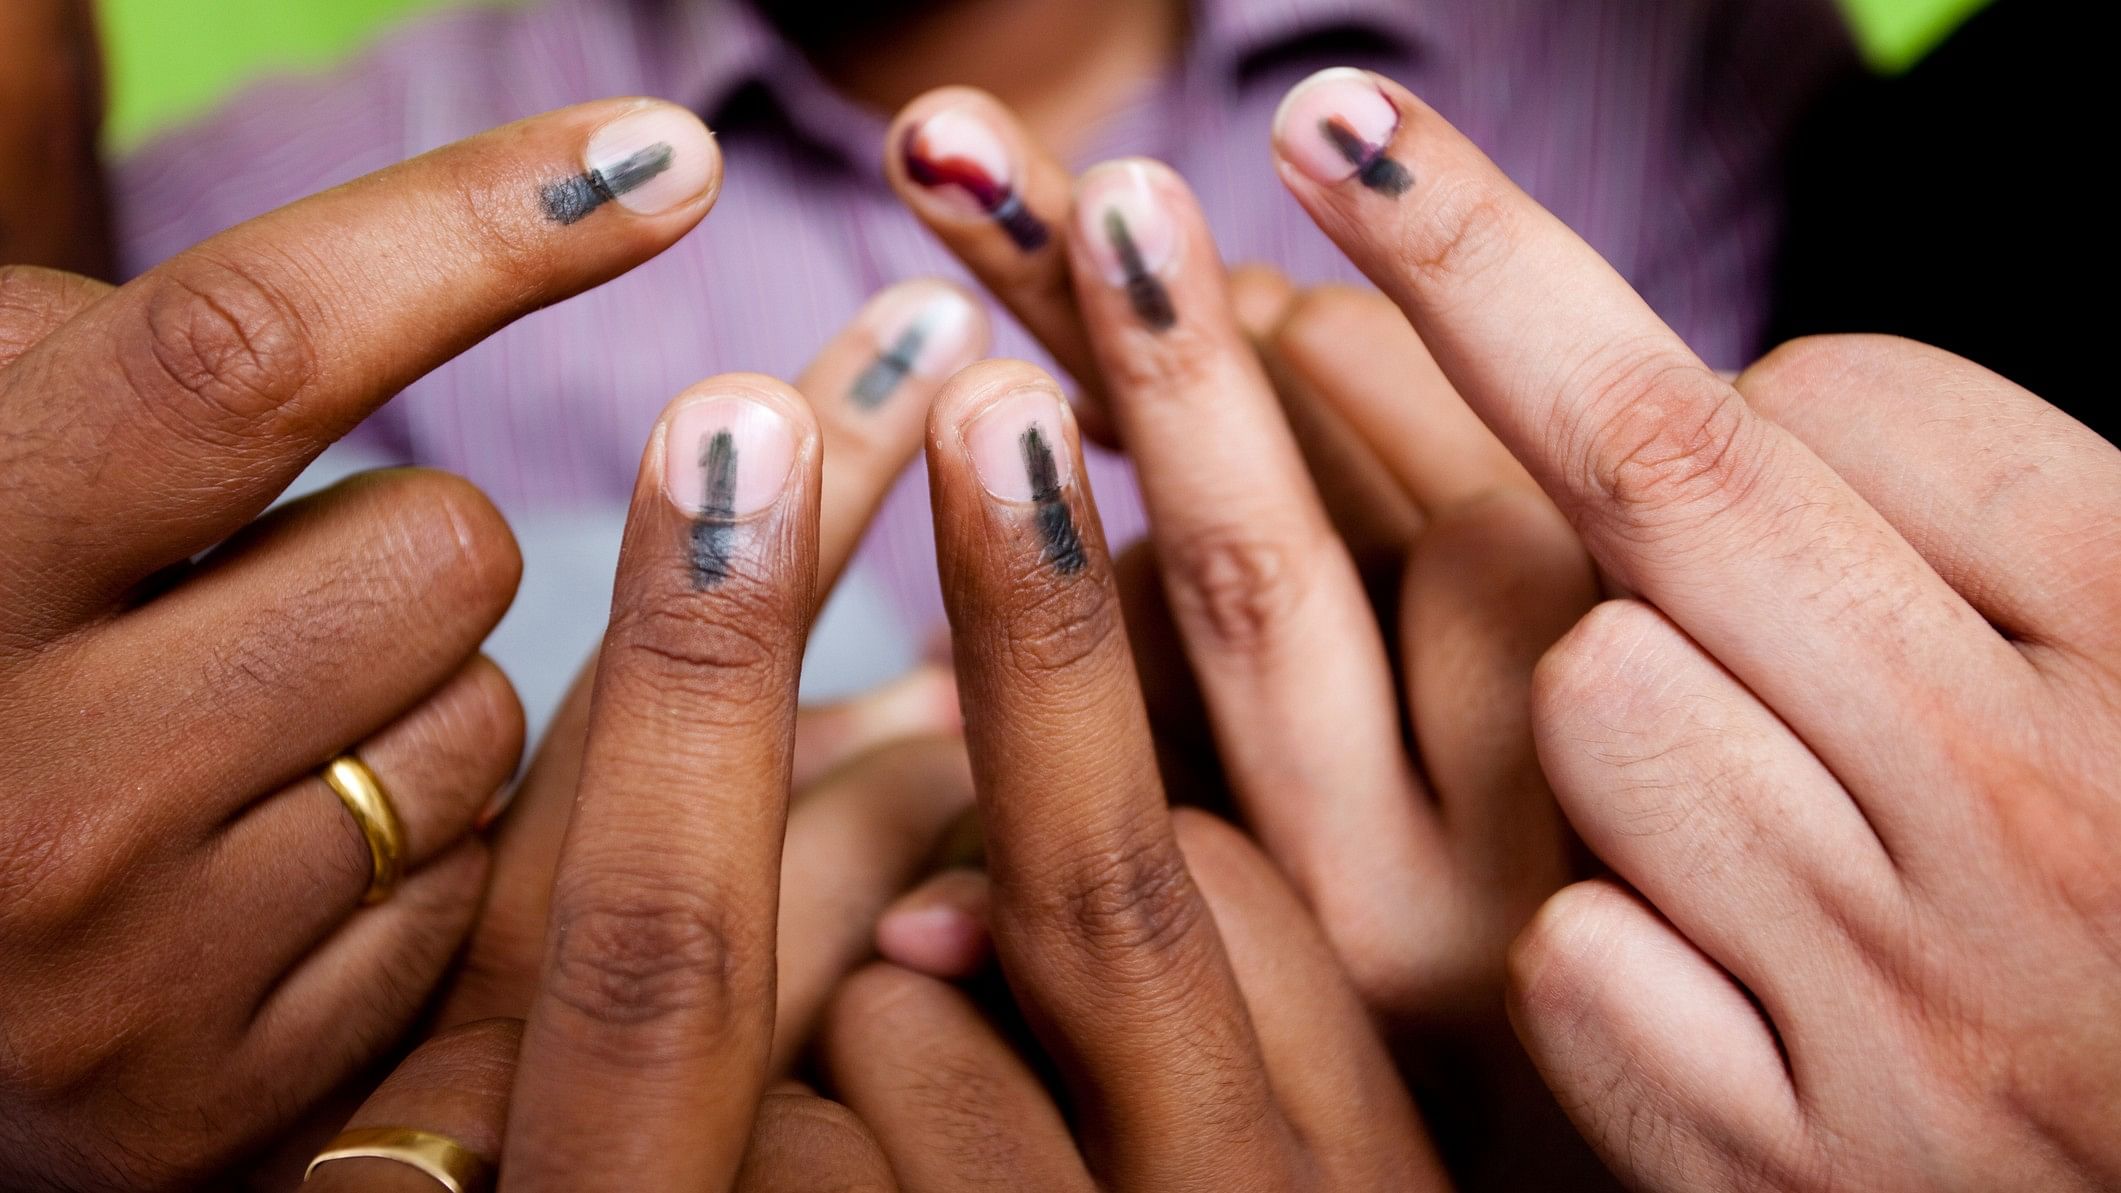 <div class="paragraphs"><p>Representative image showing voters with indelible ink on their fingers.</p></div>